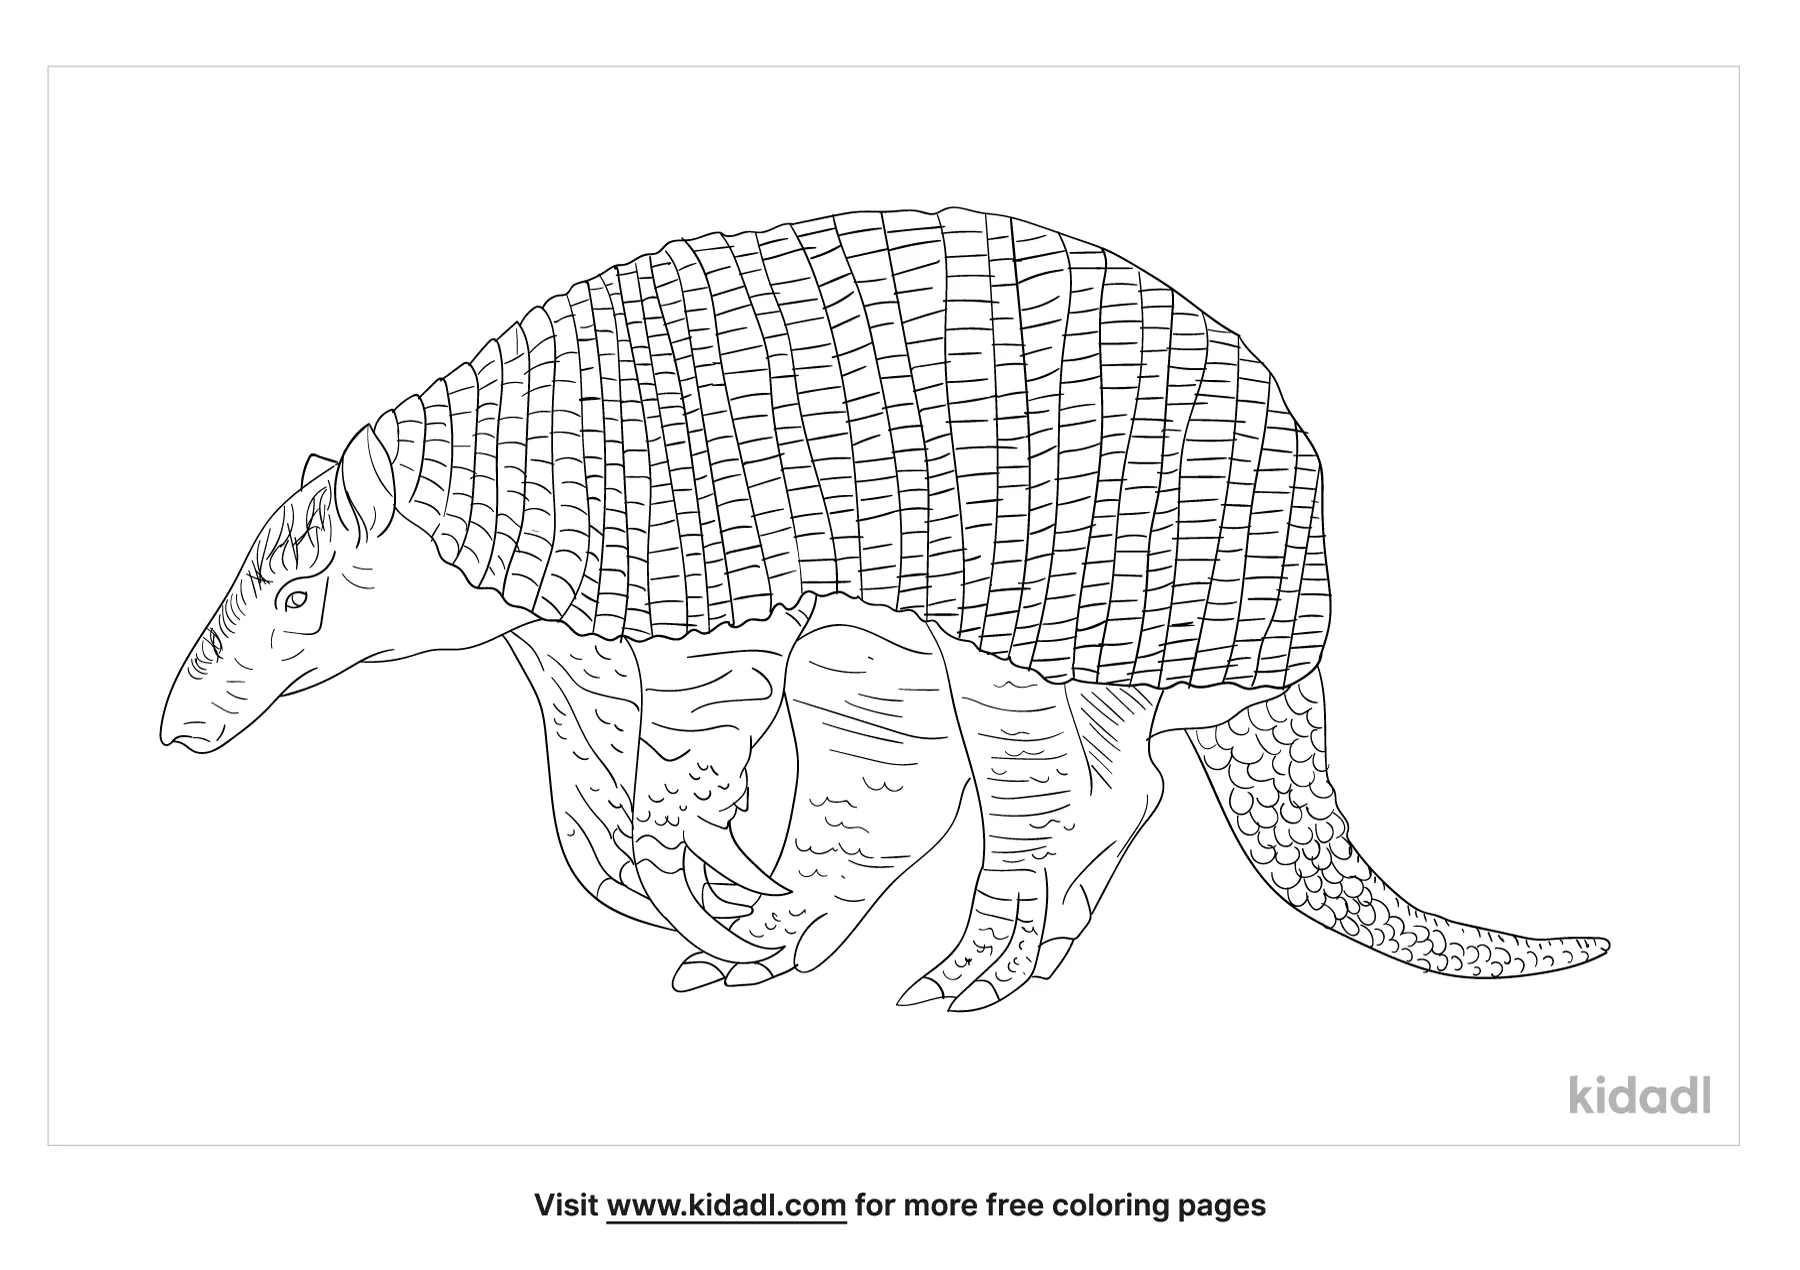 Giant Armadillo Coloring Page   Free Mammals Coloring Page   Kidadl